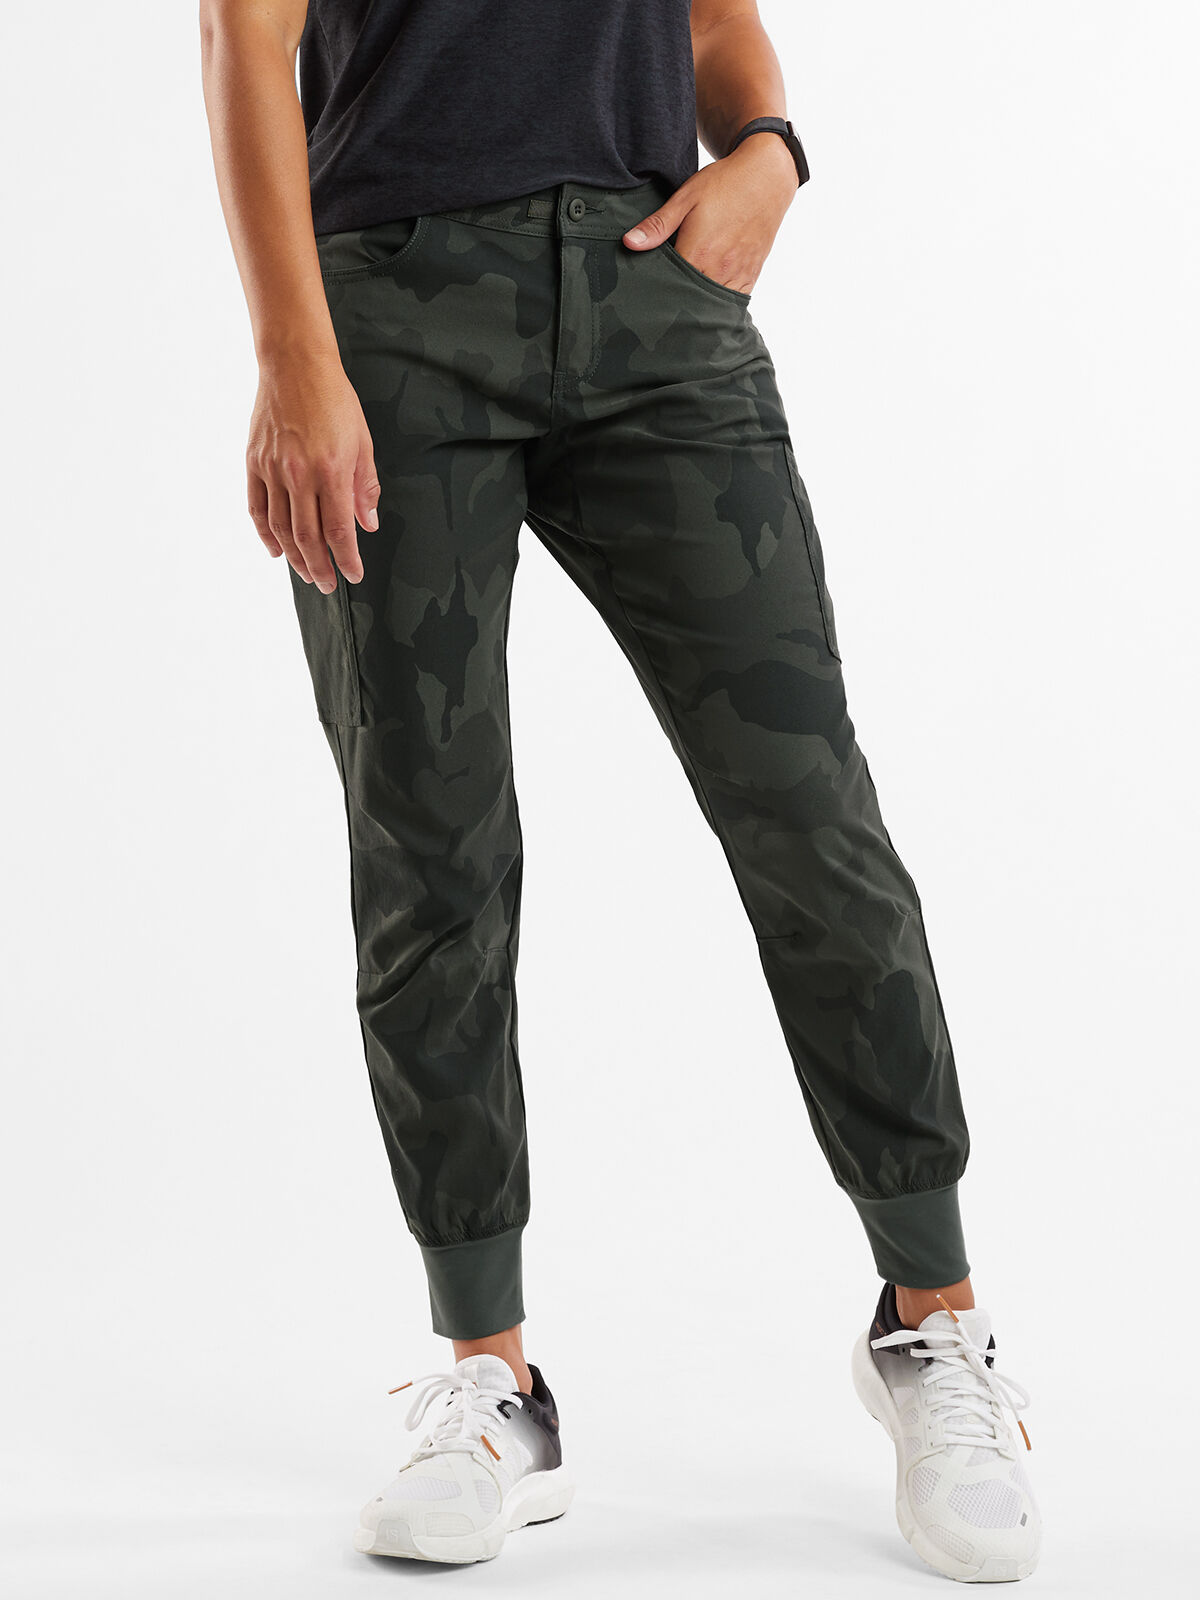 Buy MAYSIXTY Printed Cotton Slim Fit Womens Active Wear Track Pants |  Shoppers Stop